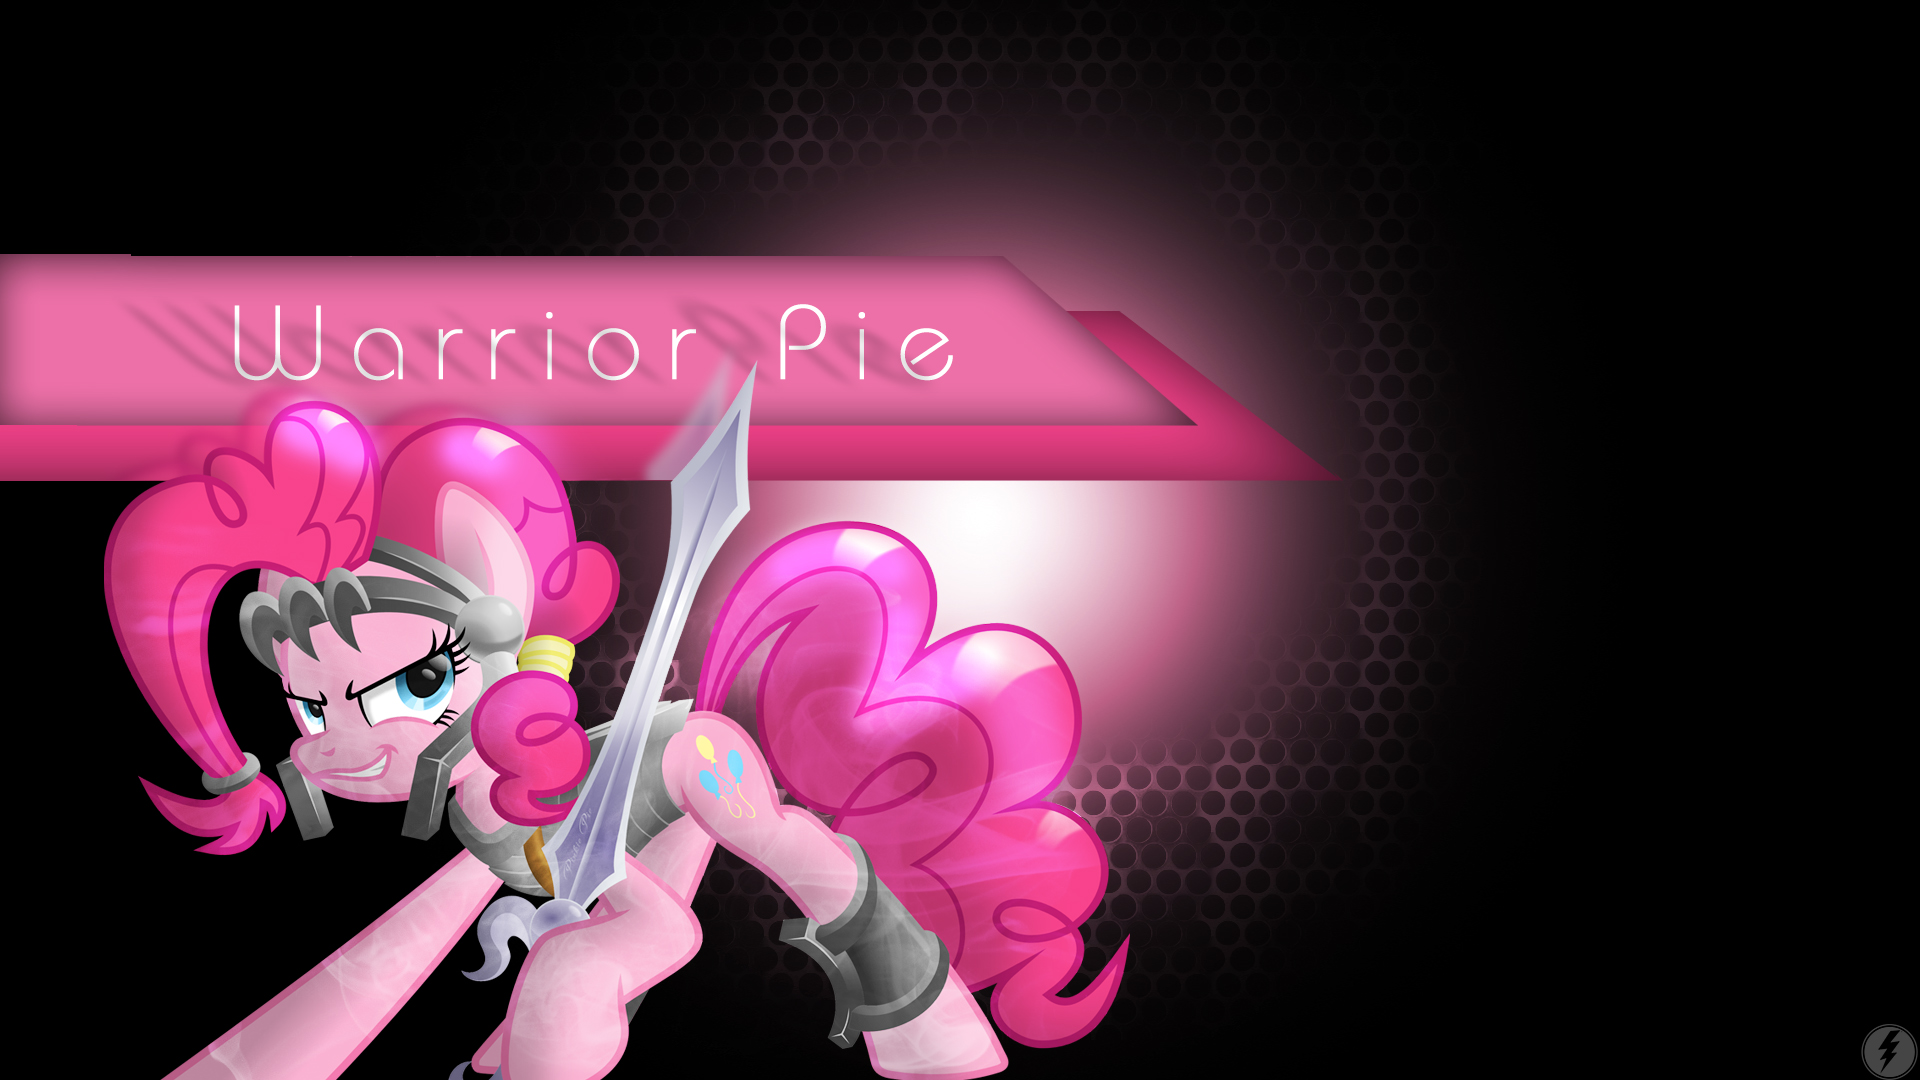 Warrior Pie Wallpaper by IIThunderboltII and RatchetHuN